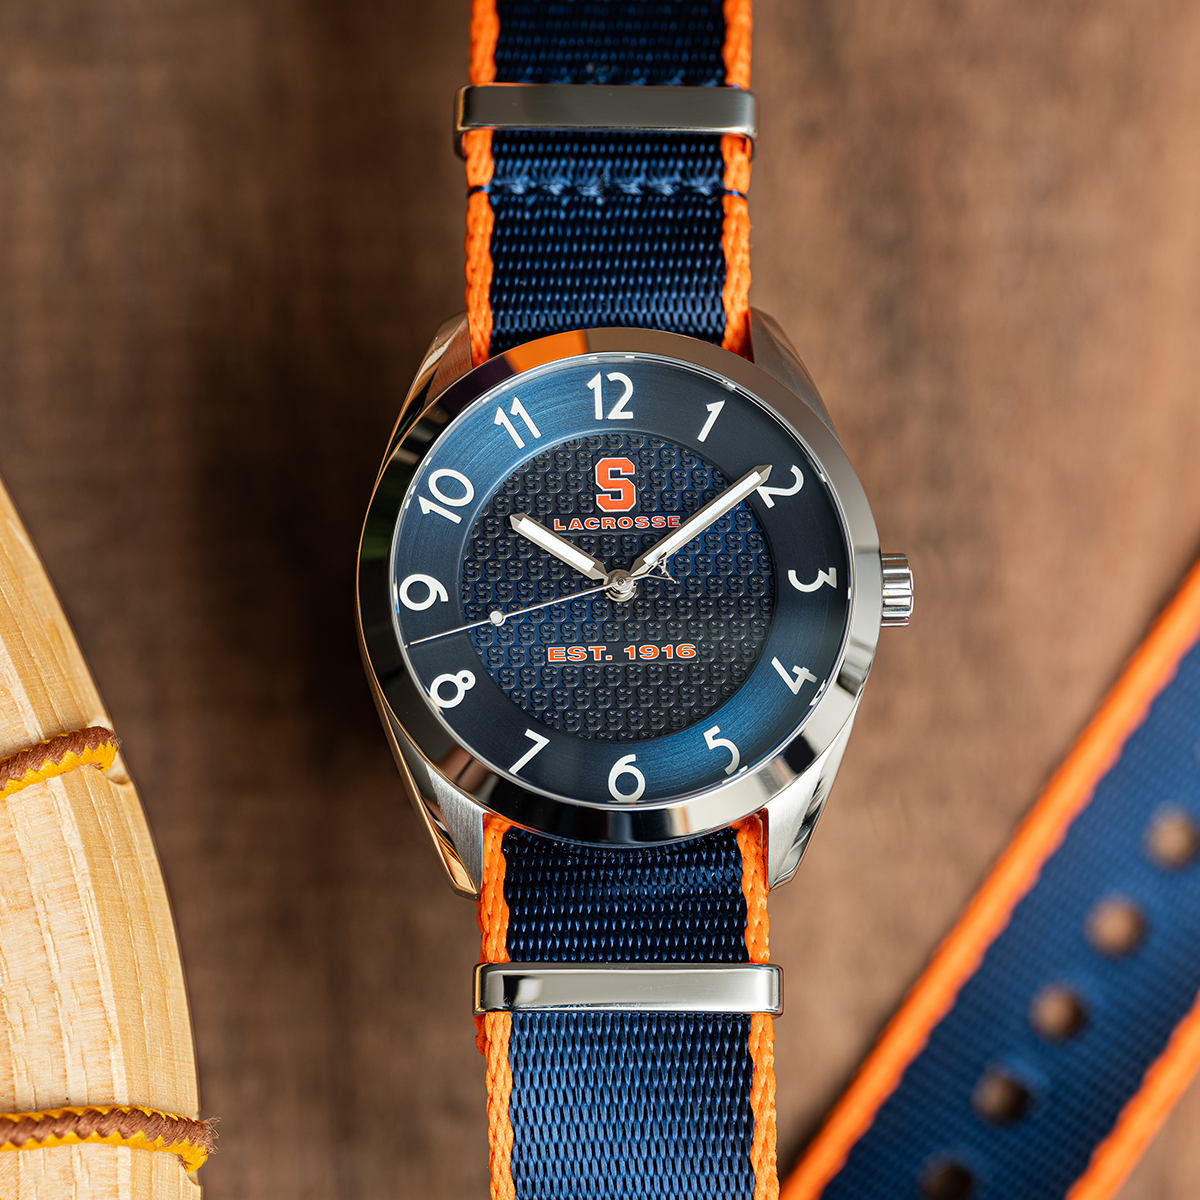 Syracuse lacrosse Swiss made automatic watch. Front view with color-matched NATO strap.